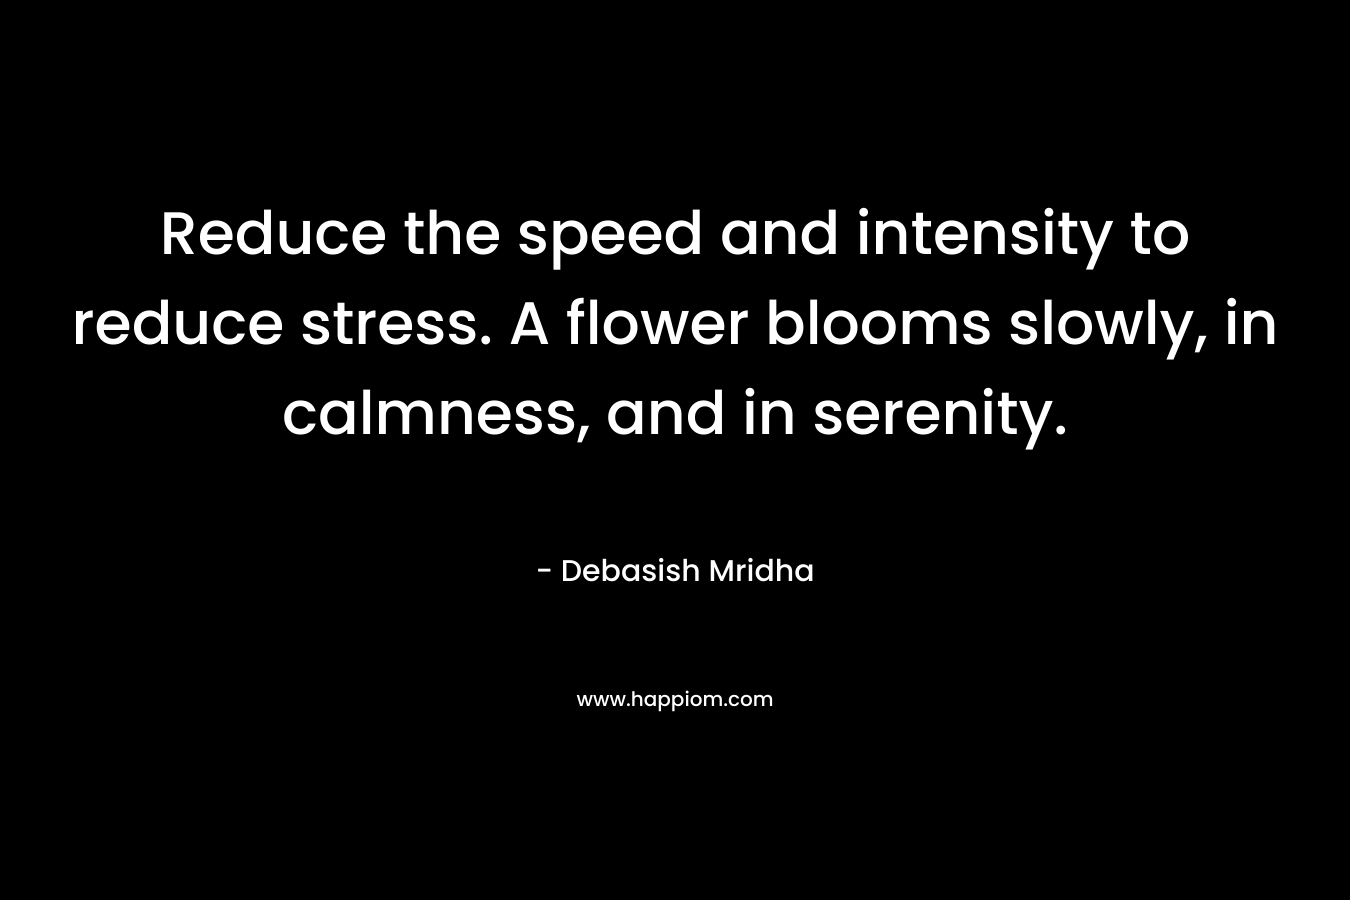 Reduce the speed and intensity to reduce stress. A flower blooms slowly, in calmness, and in serenity.